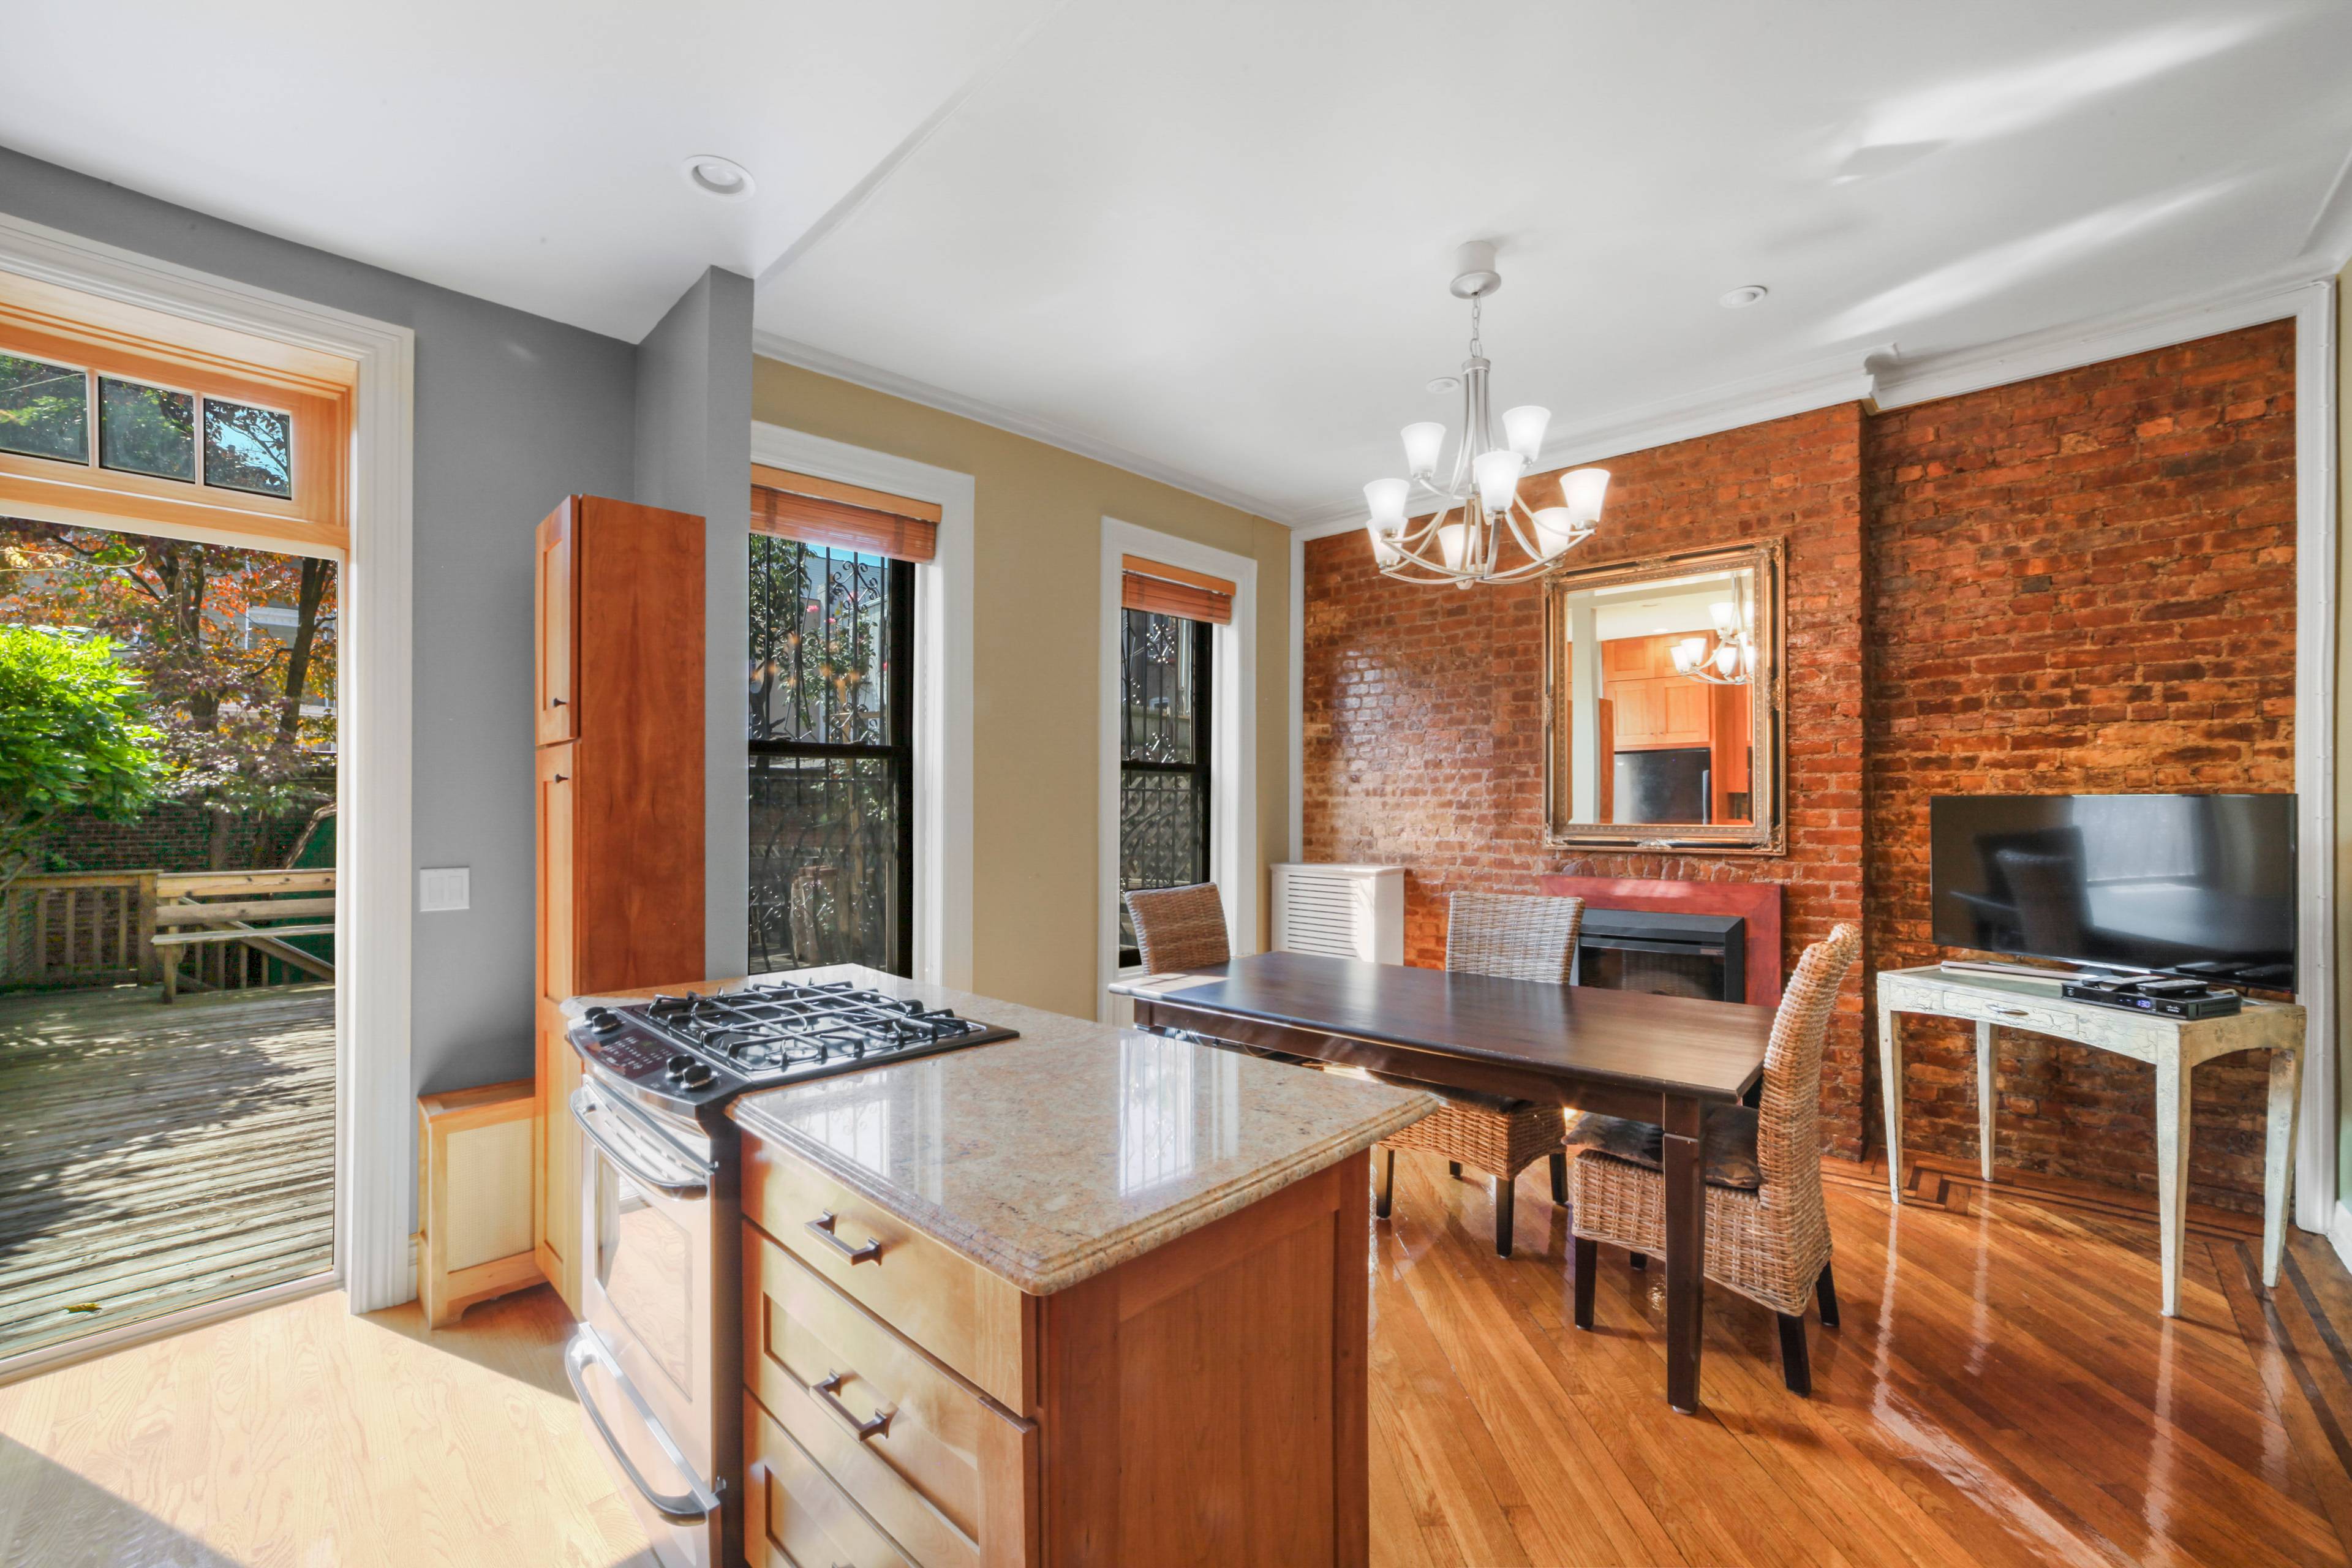 Live on a quintessential, tree lined street which embodies the ambiance of traditional Brooklyn limestones.